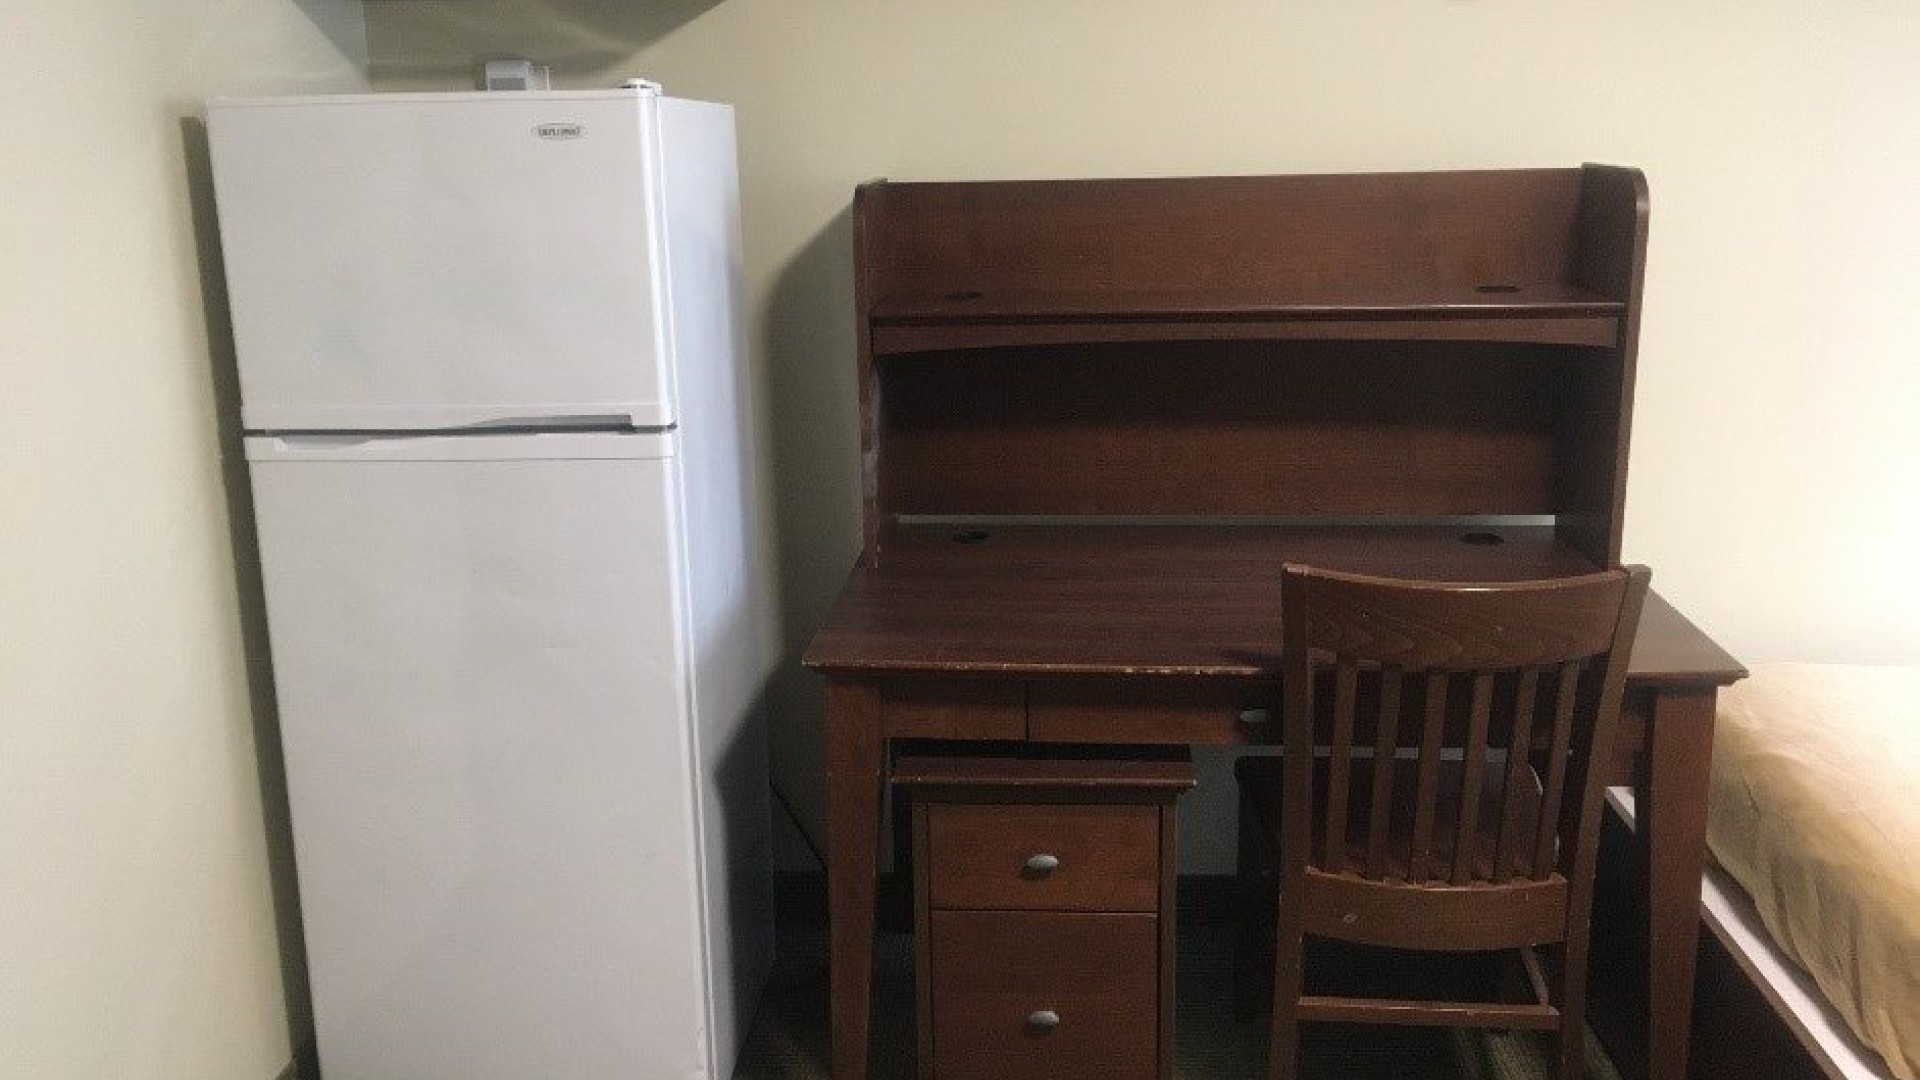 Fridge and desk located in a double room